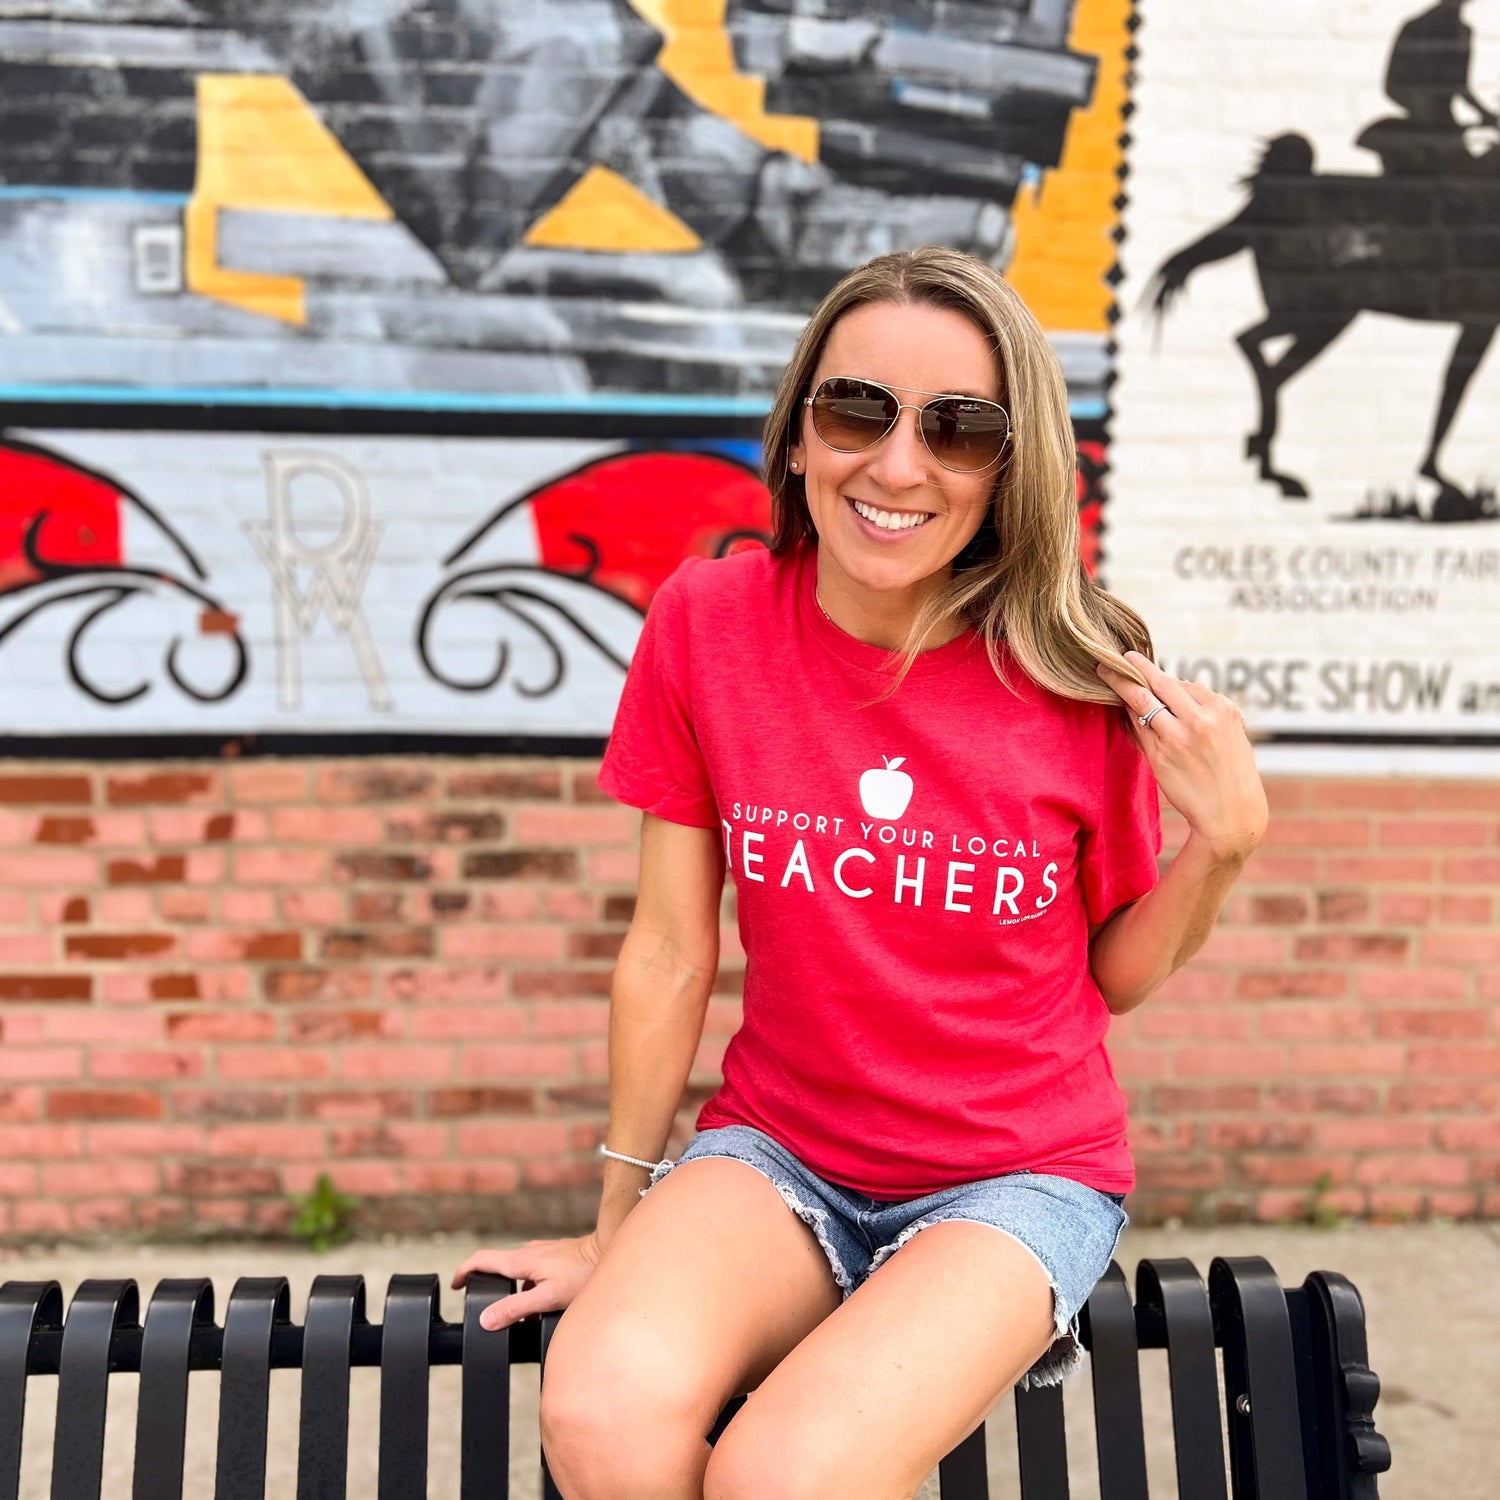 SUPPORT LOCAL TEACHERS - Graphic Tees